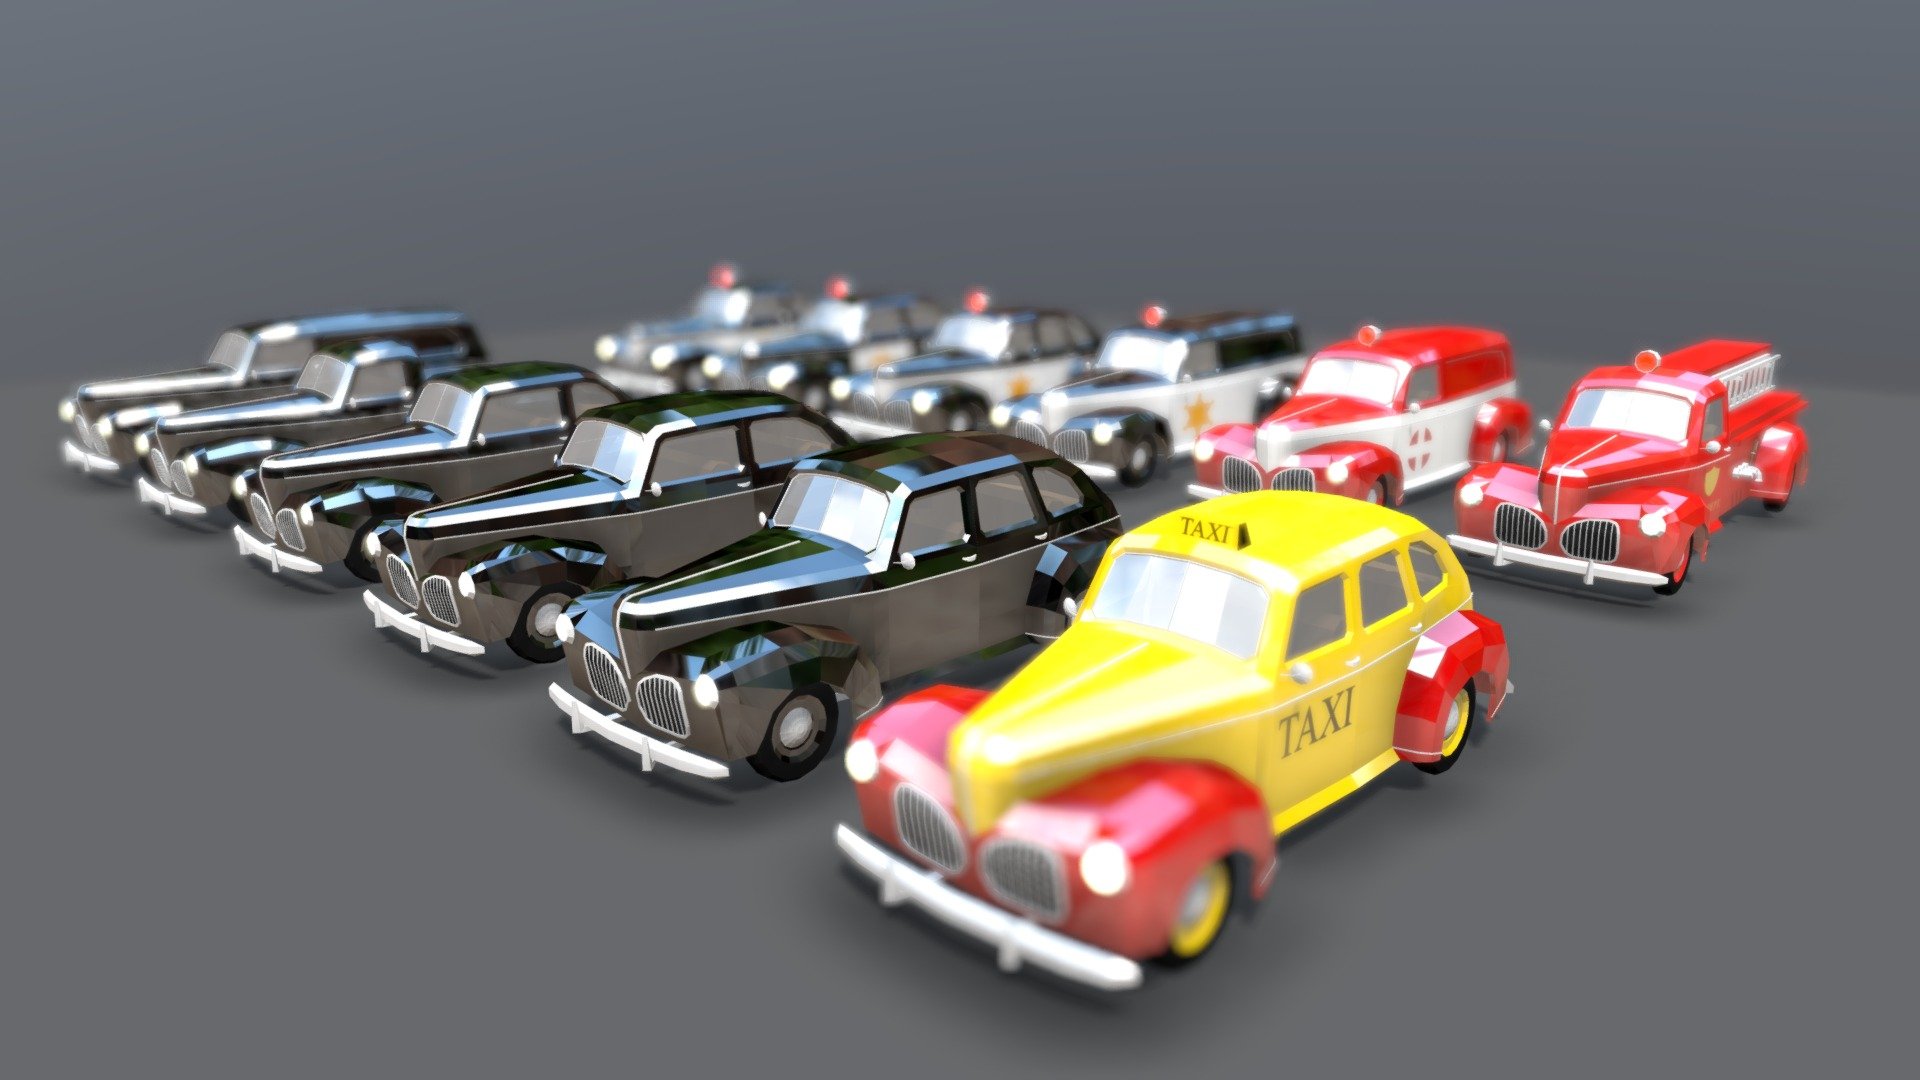 This “Lowpoly Vintage Car Pack” represents a collection of cars from the early 1940s.

It features a emergency vehicles and a bunch of normal ordinary citizen vehicles.

Doors, windows and tires are separate models, so this pack is very suitable for GTA like style games.

This car pack is available on the Unity Asset Store for 24.99 USD 3d model